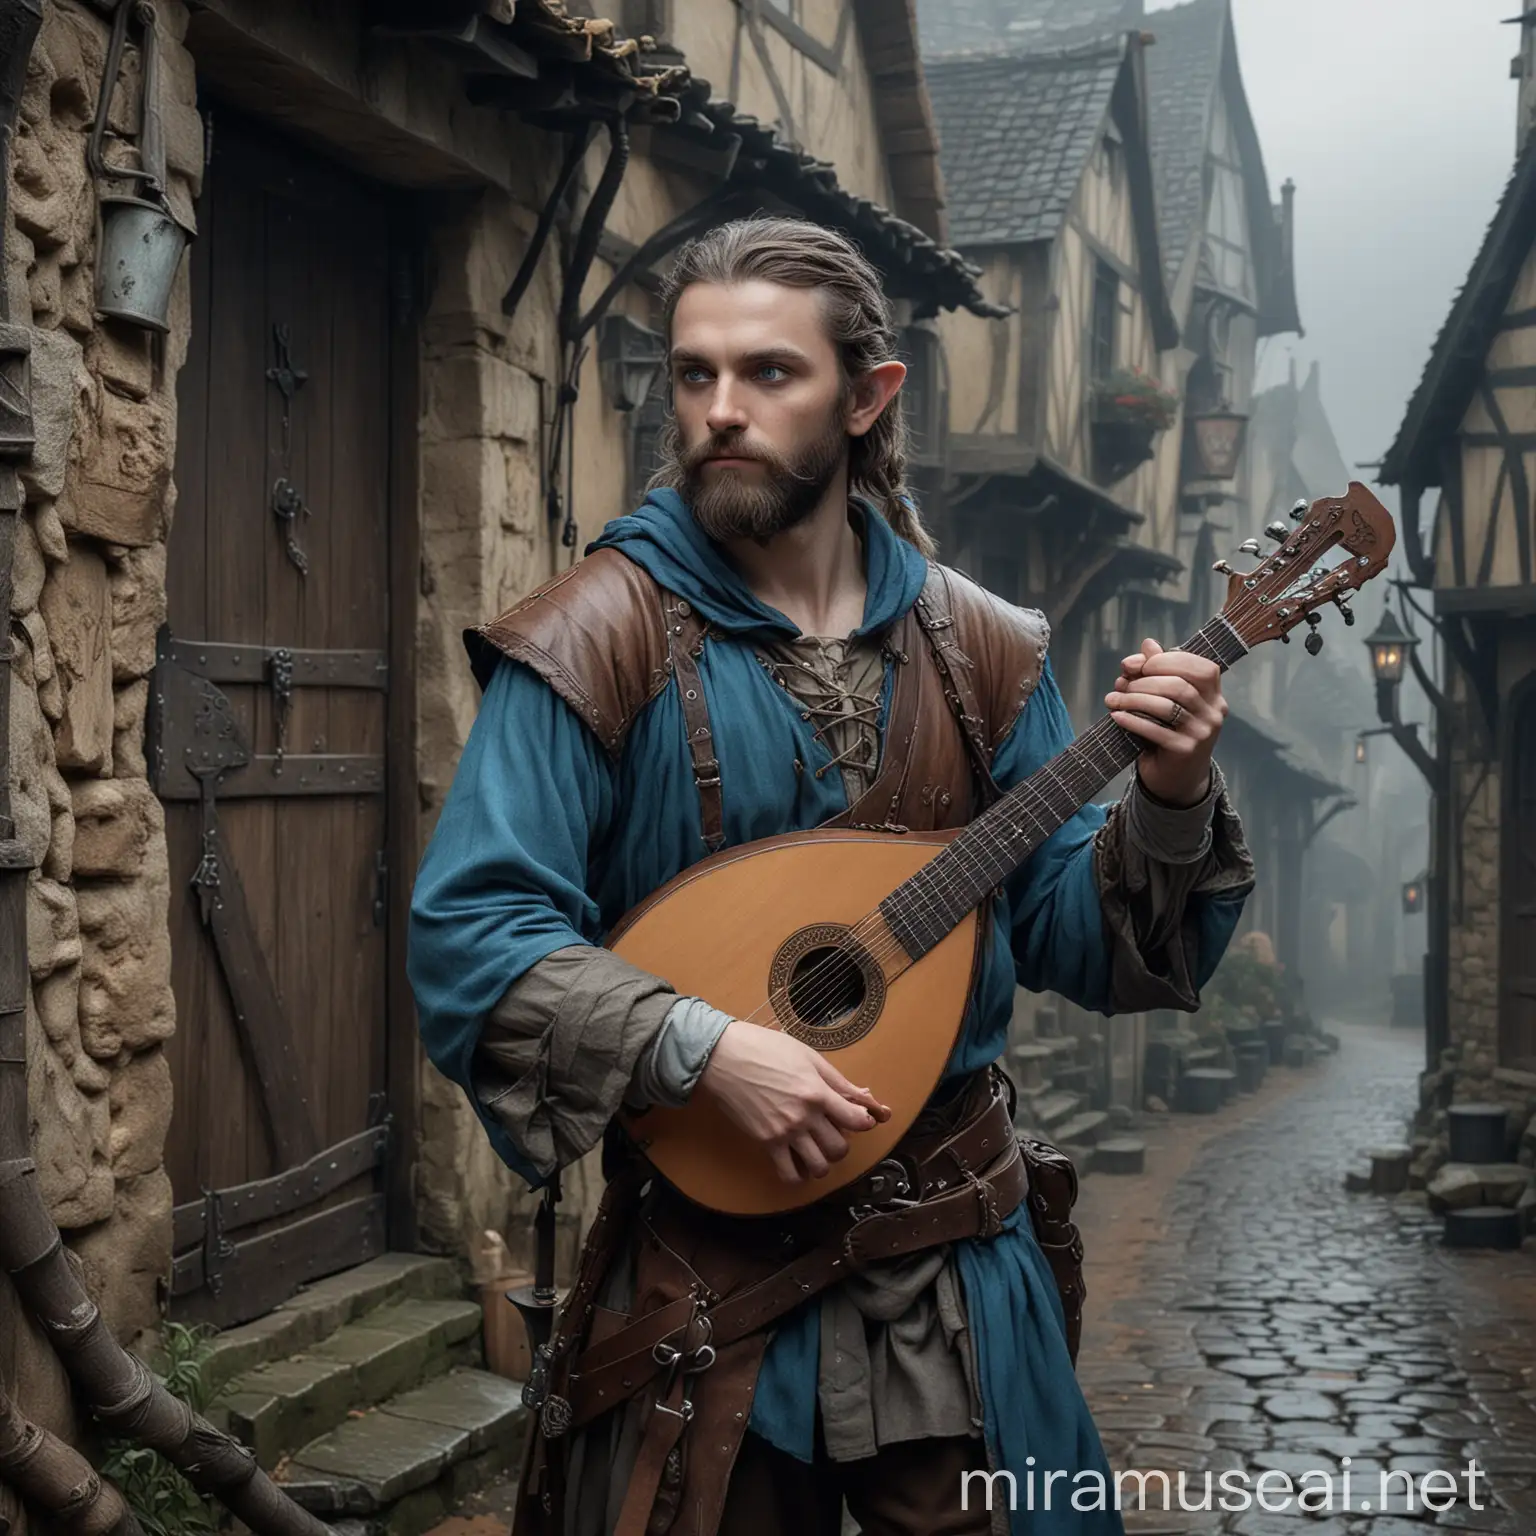 fantasy setting, a blue eyed bearded half elf bard, playing a lute in a gloomy medieval village, wearing a short sword and a potion belt

